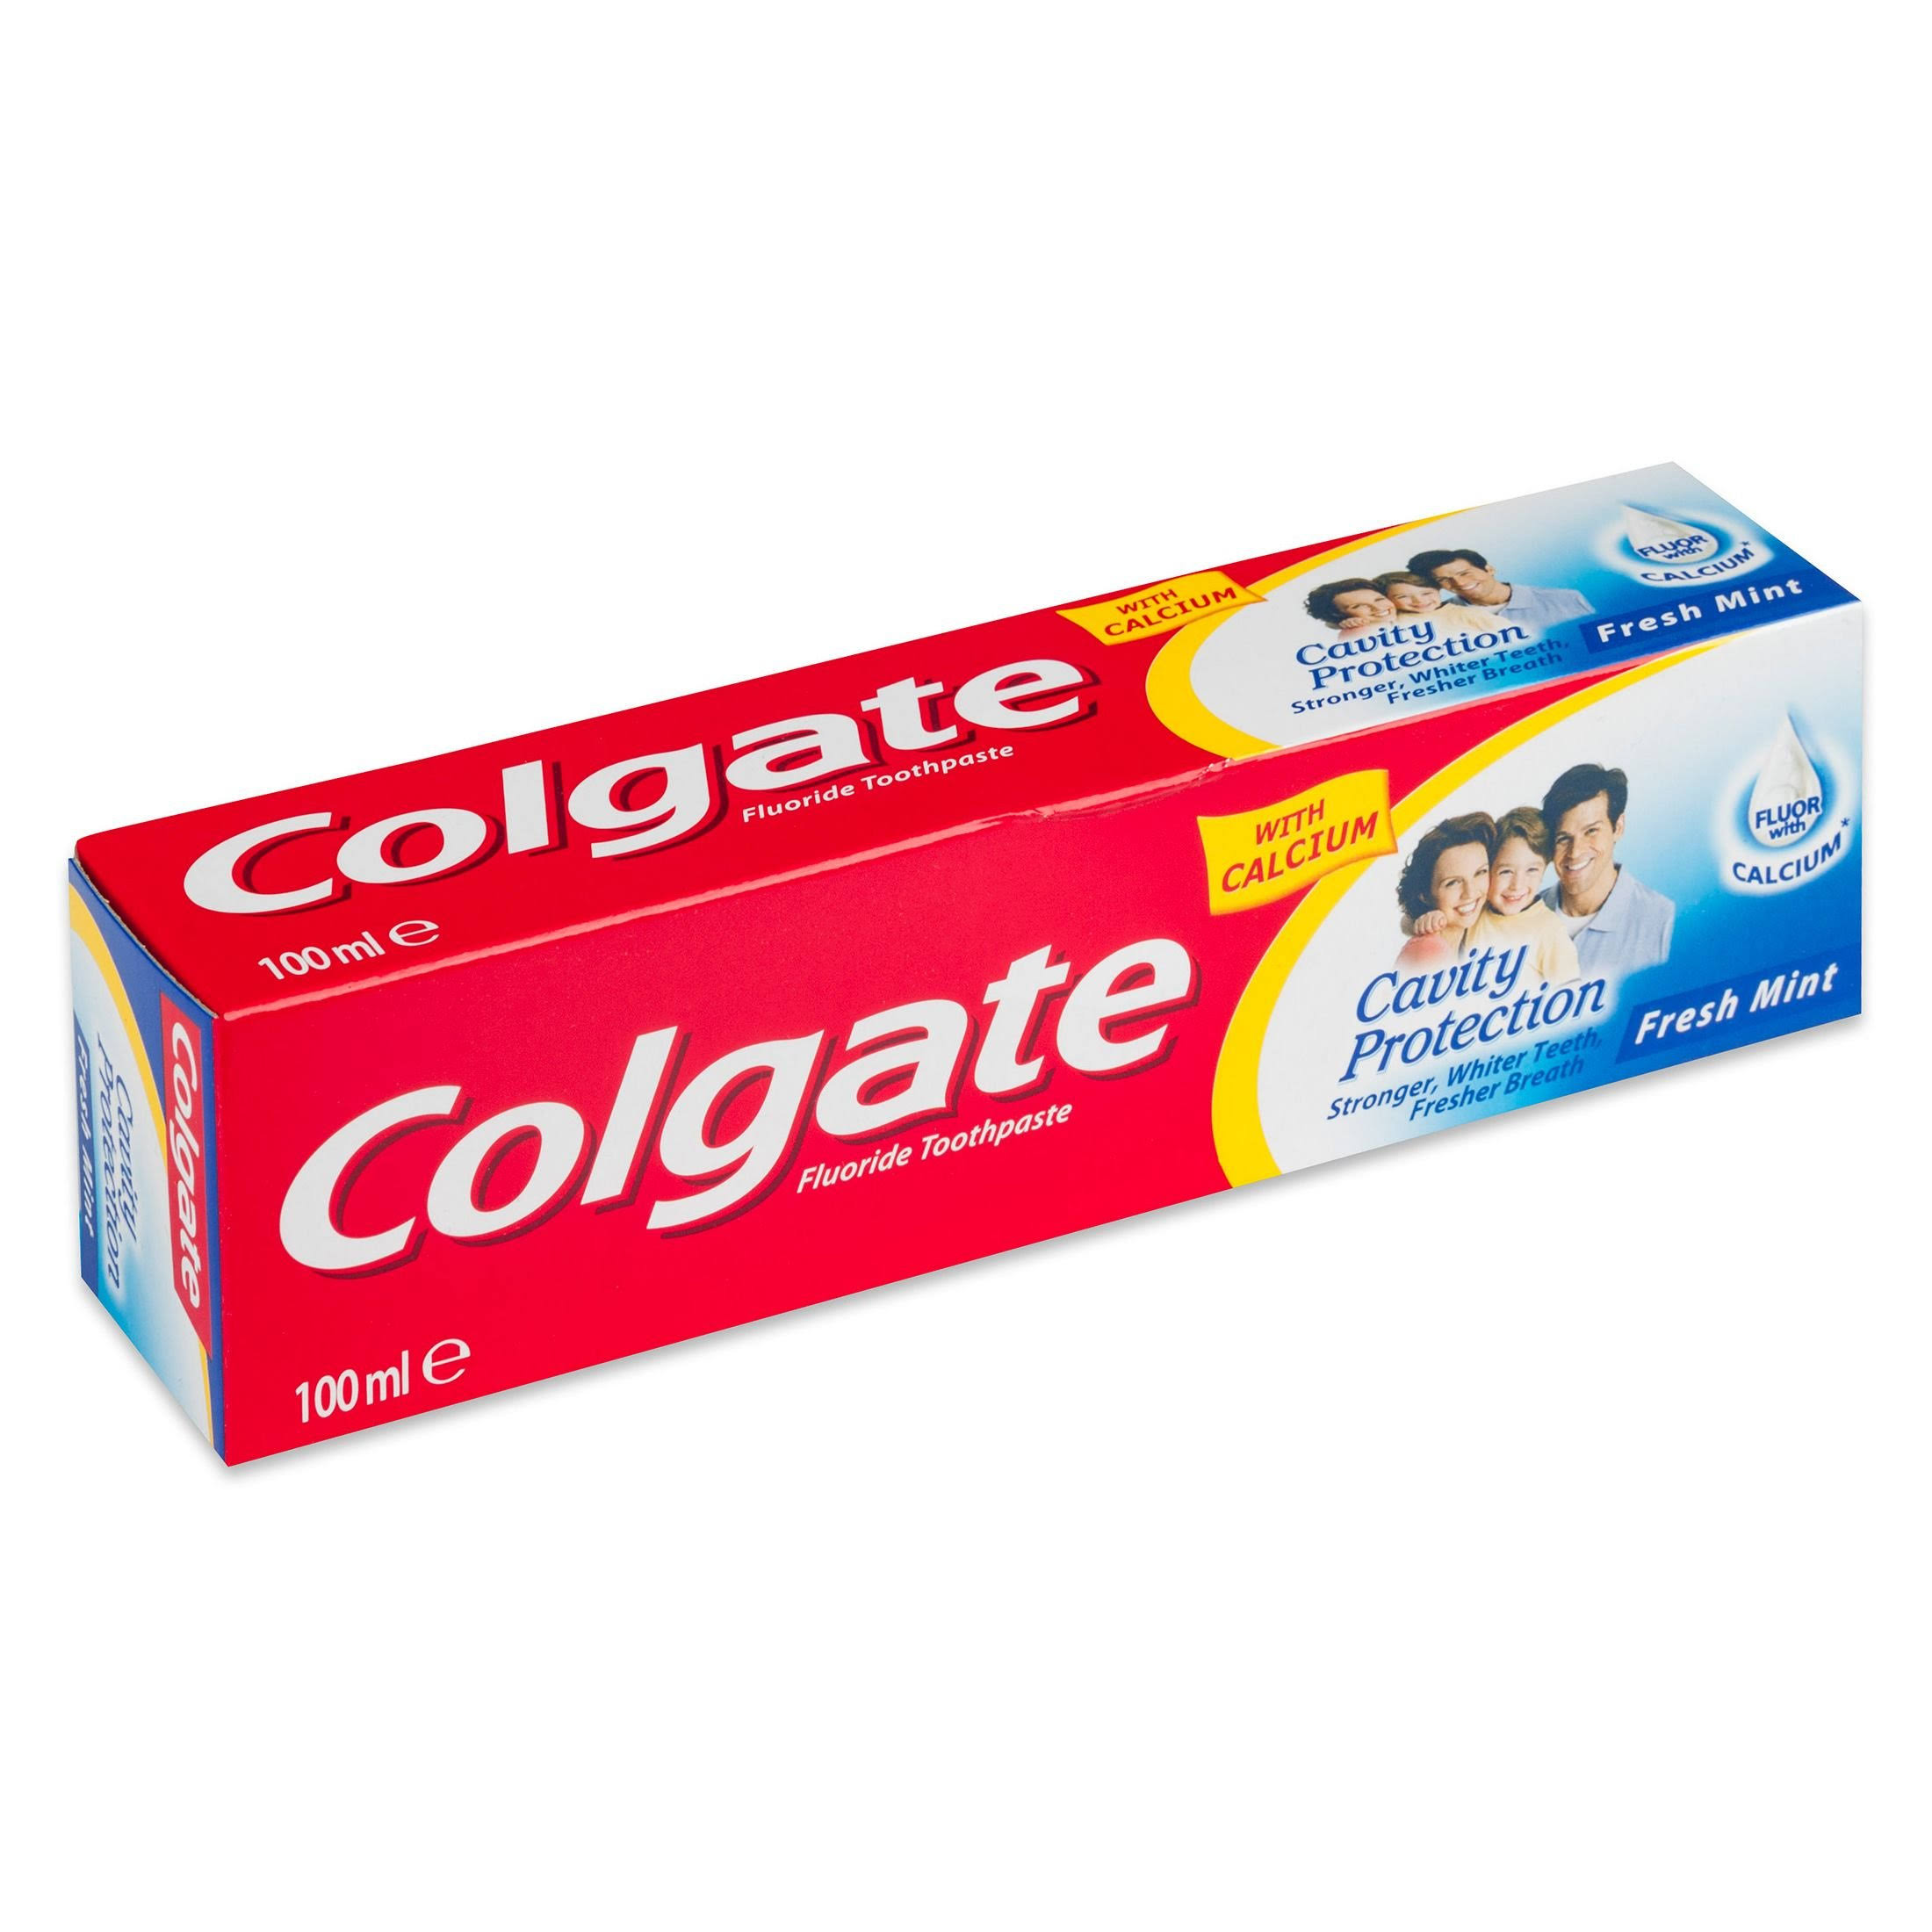 Colgate Cavity Protection Toothpaste - Fresh Mint, 100ml